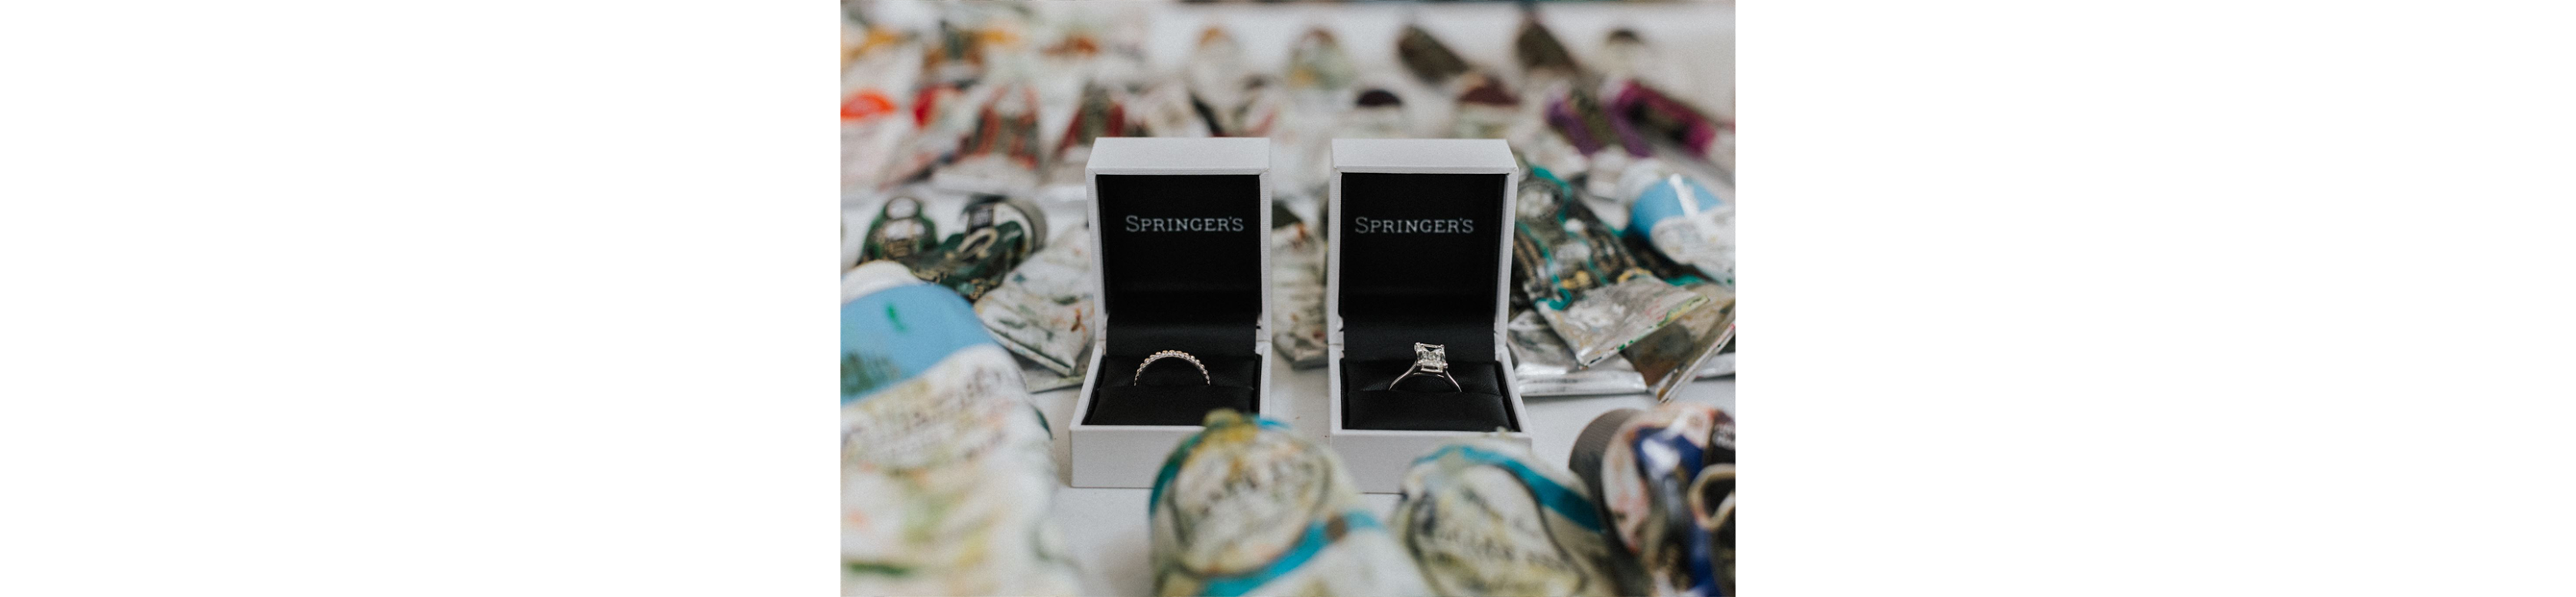 Are Engagement Rings and Wedding Rings the Same?